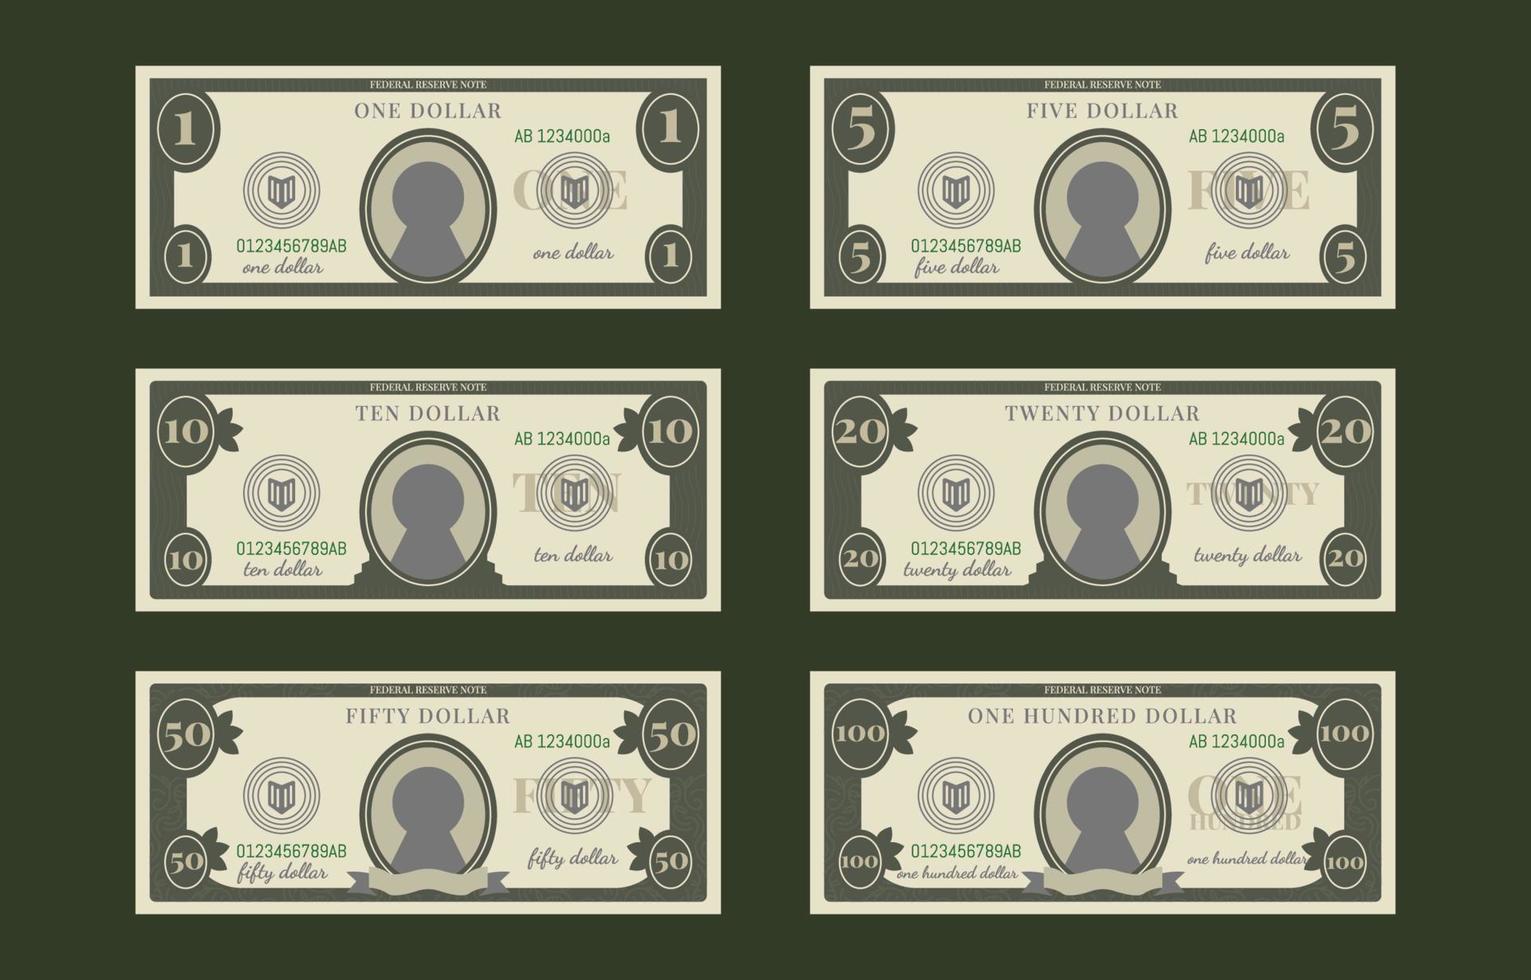 The Green Real Paper Money Elements vector